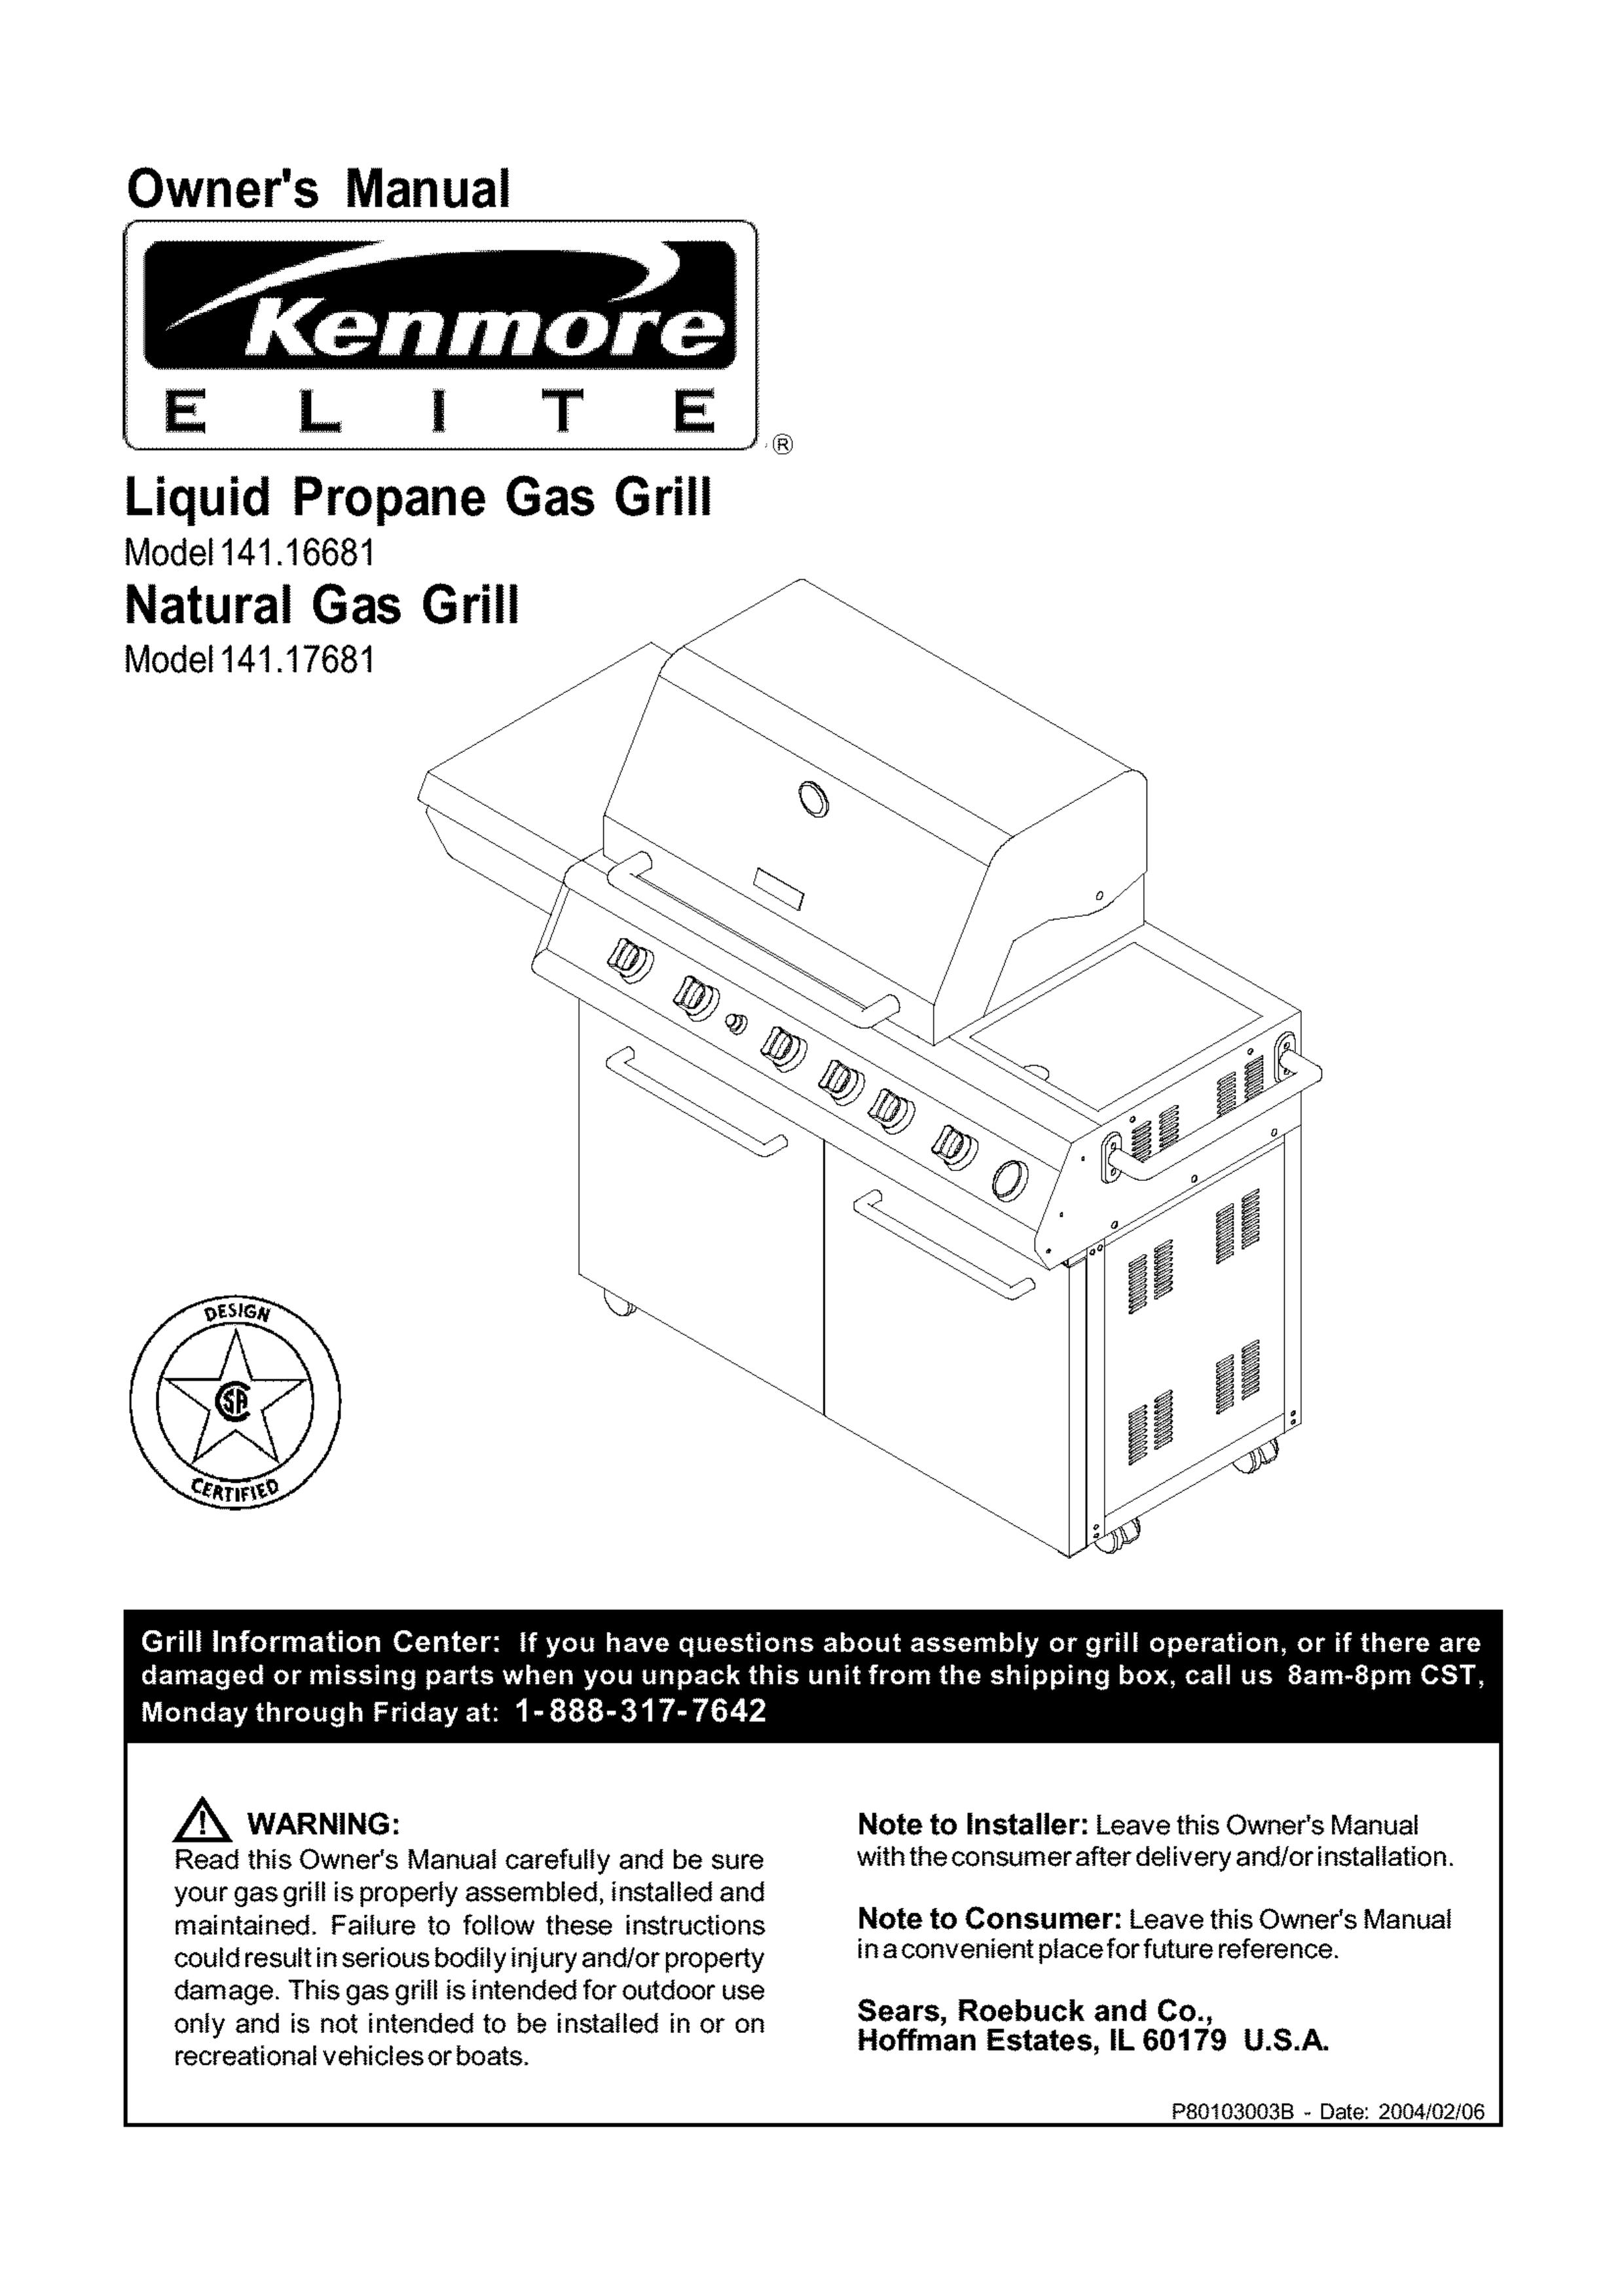 Kenmore 141.17681 Gas Grill User Manual